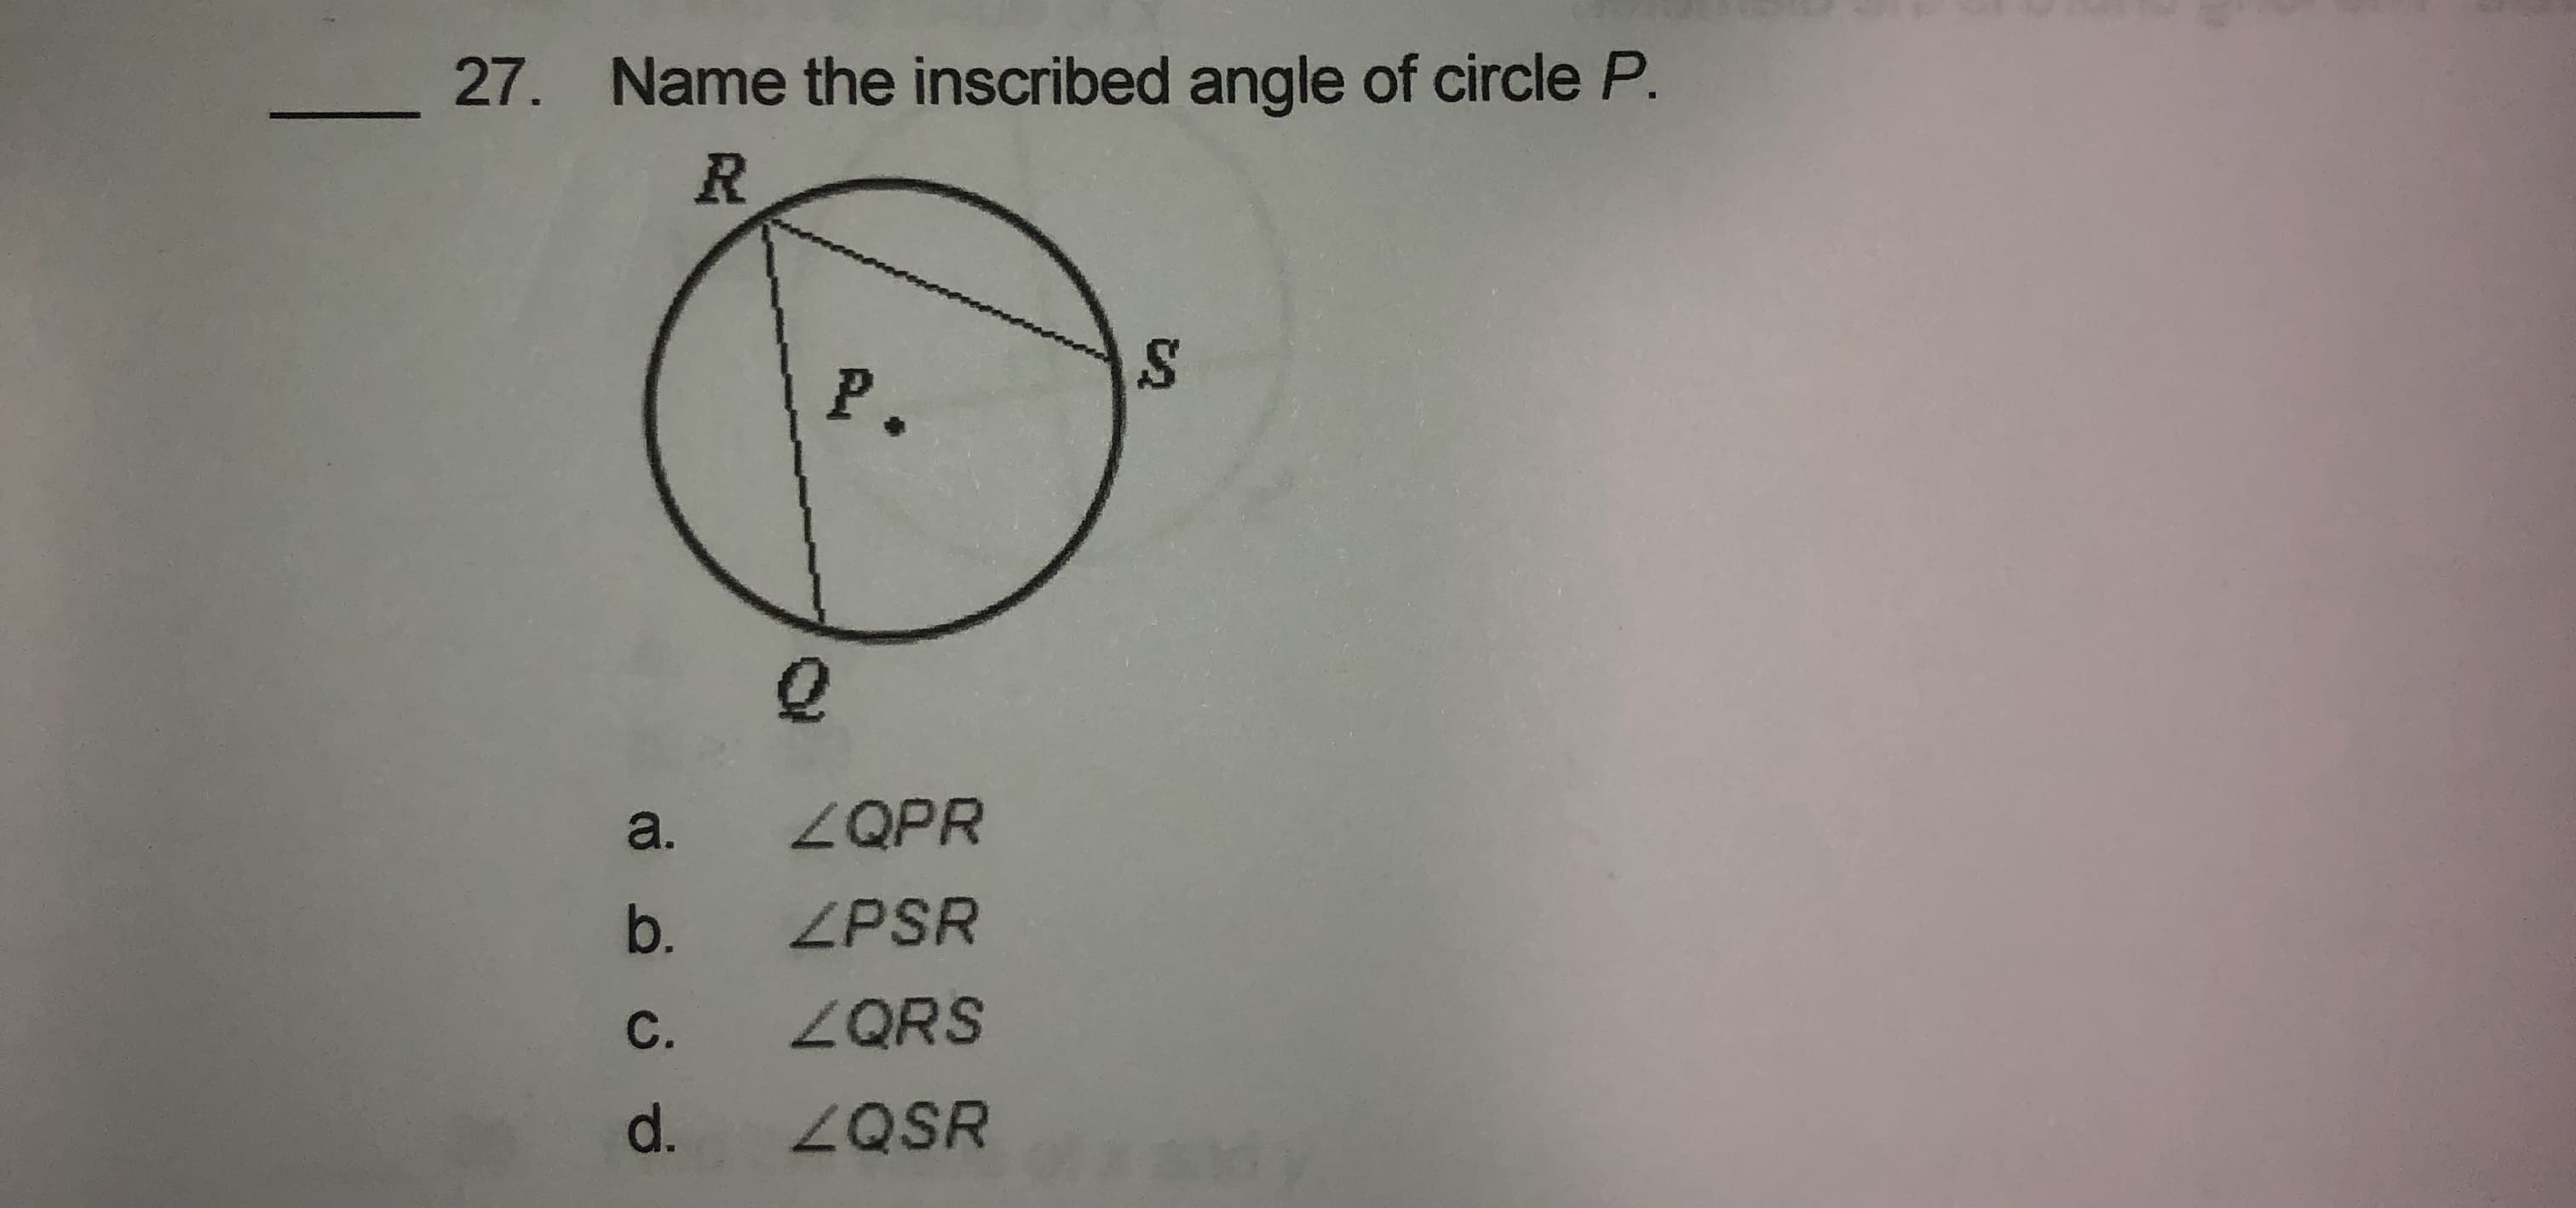 27. Name the inscribed angle of circle P.
P.
